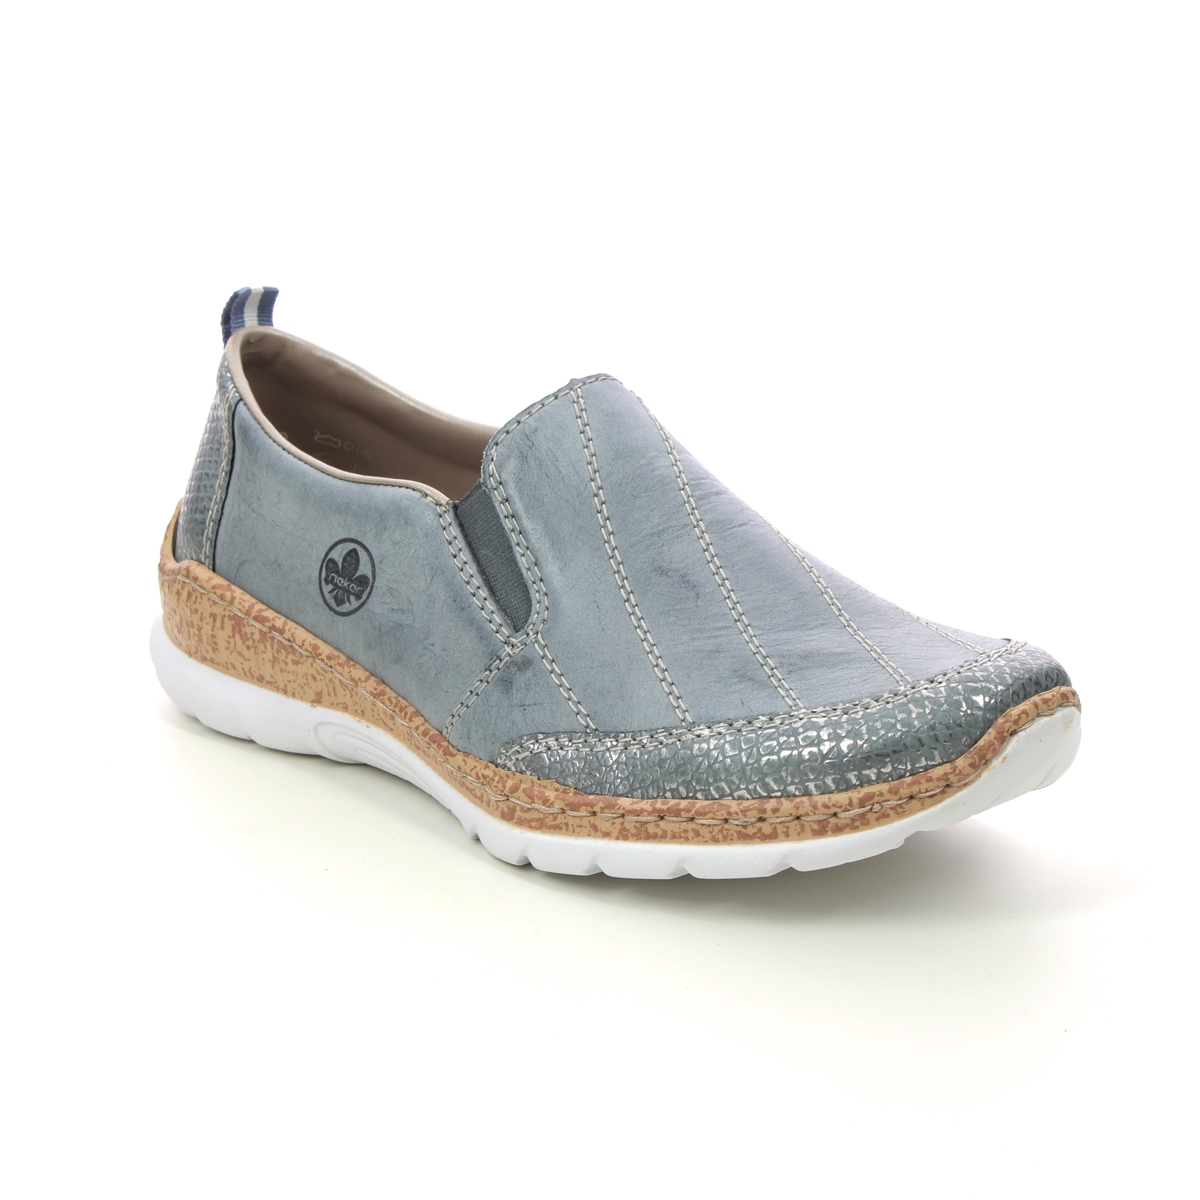 Rieker Empilucas Denim Leather Womens Comfort Slip On Shoes N4274-12 In Size 39 In Plain Denim Leather